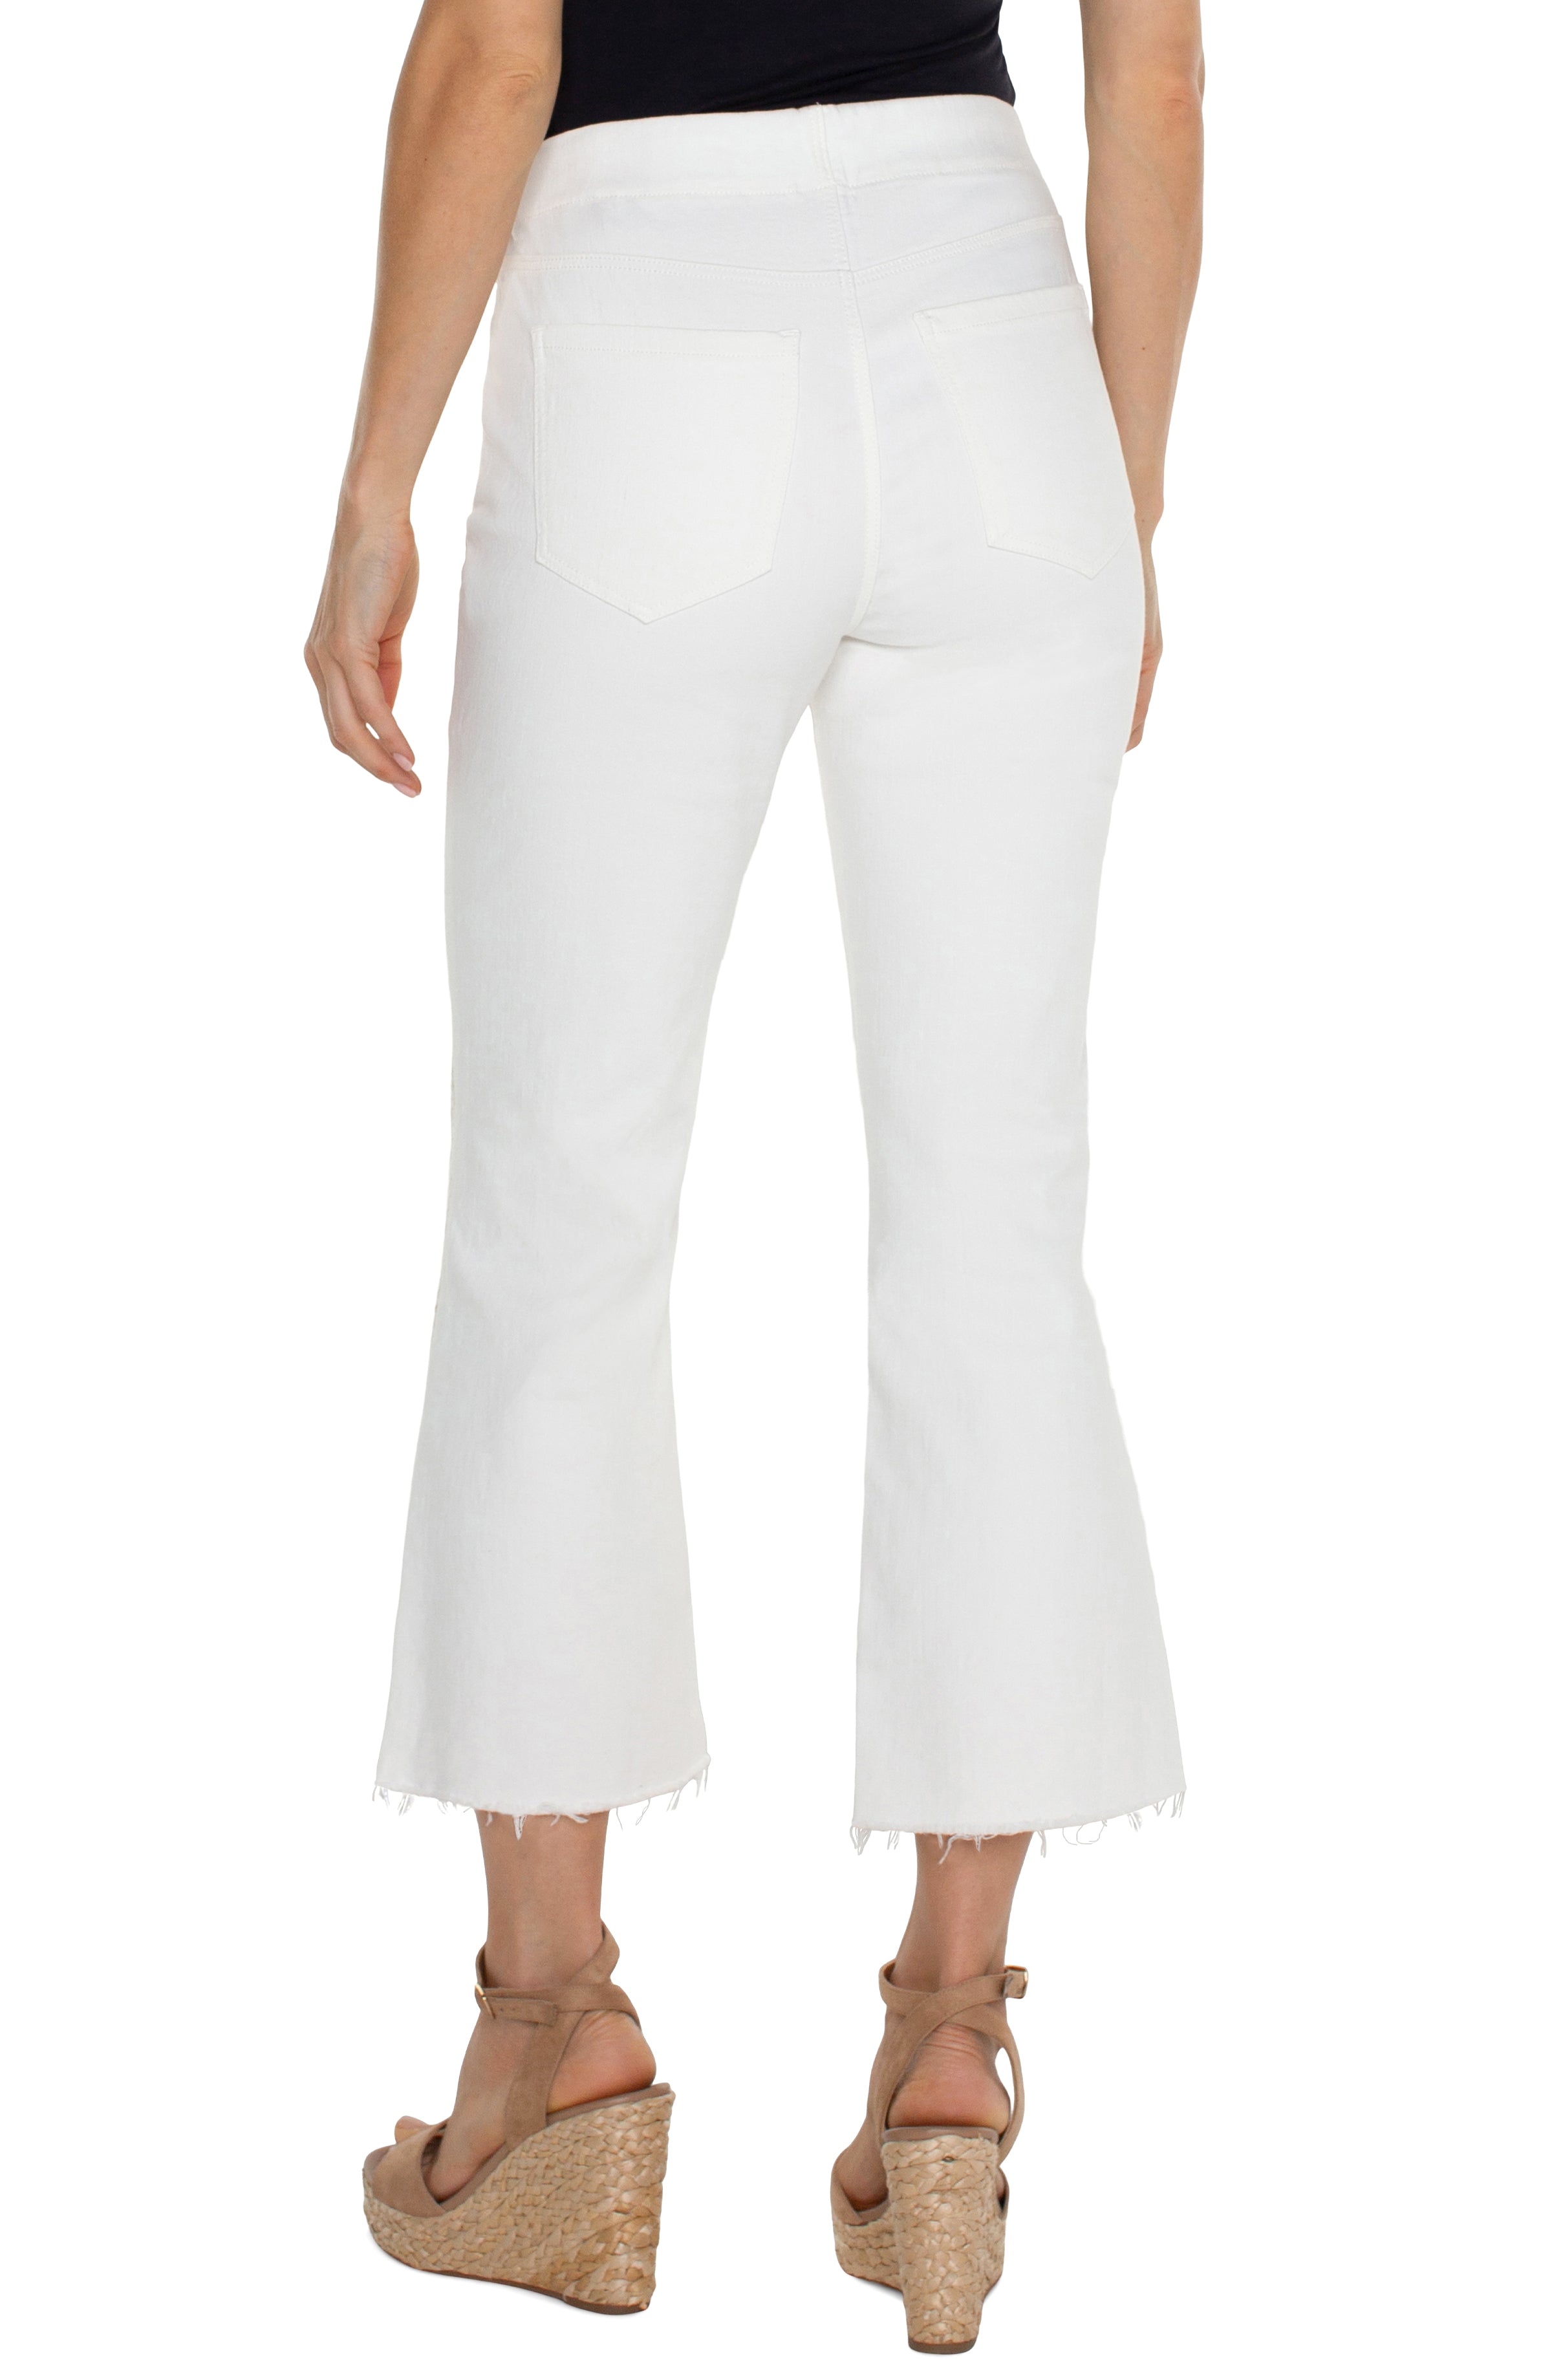 LVP Chloe Crop Flare with Fray Hem - Bright White Back View